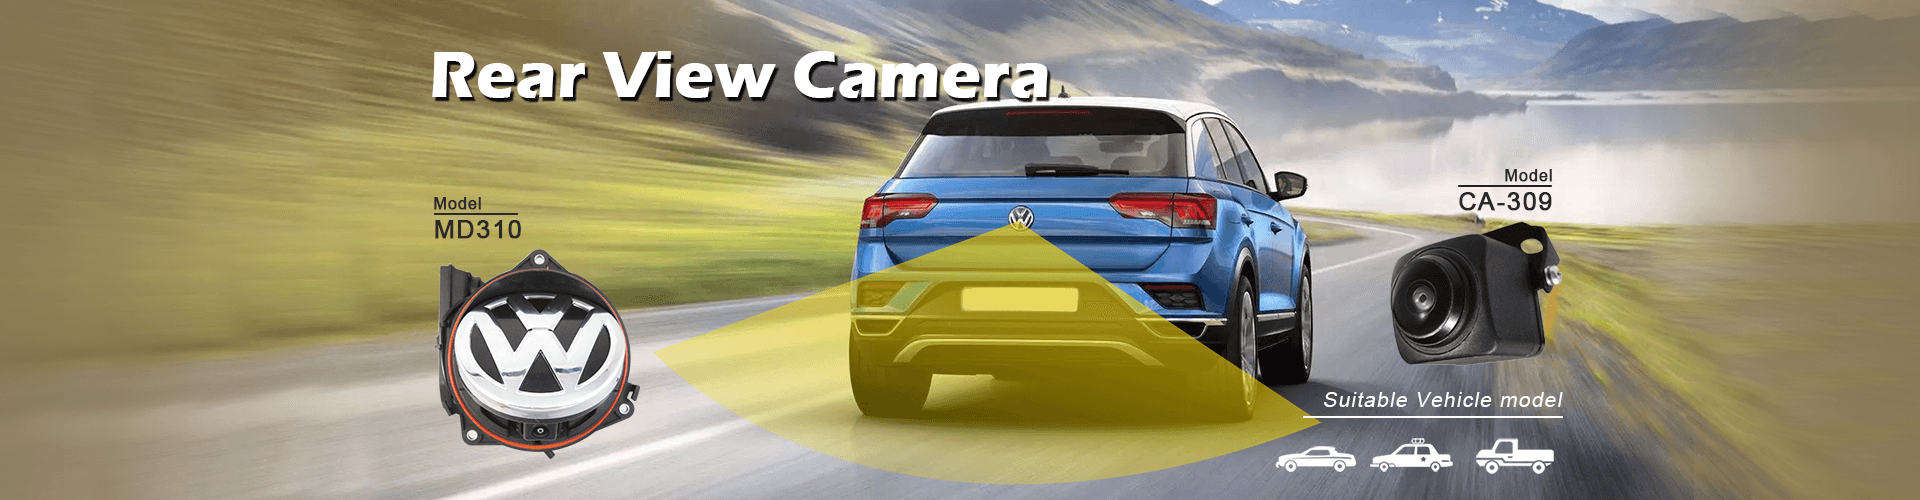 High quality rear view cameras for passenger vehicles